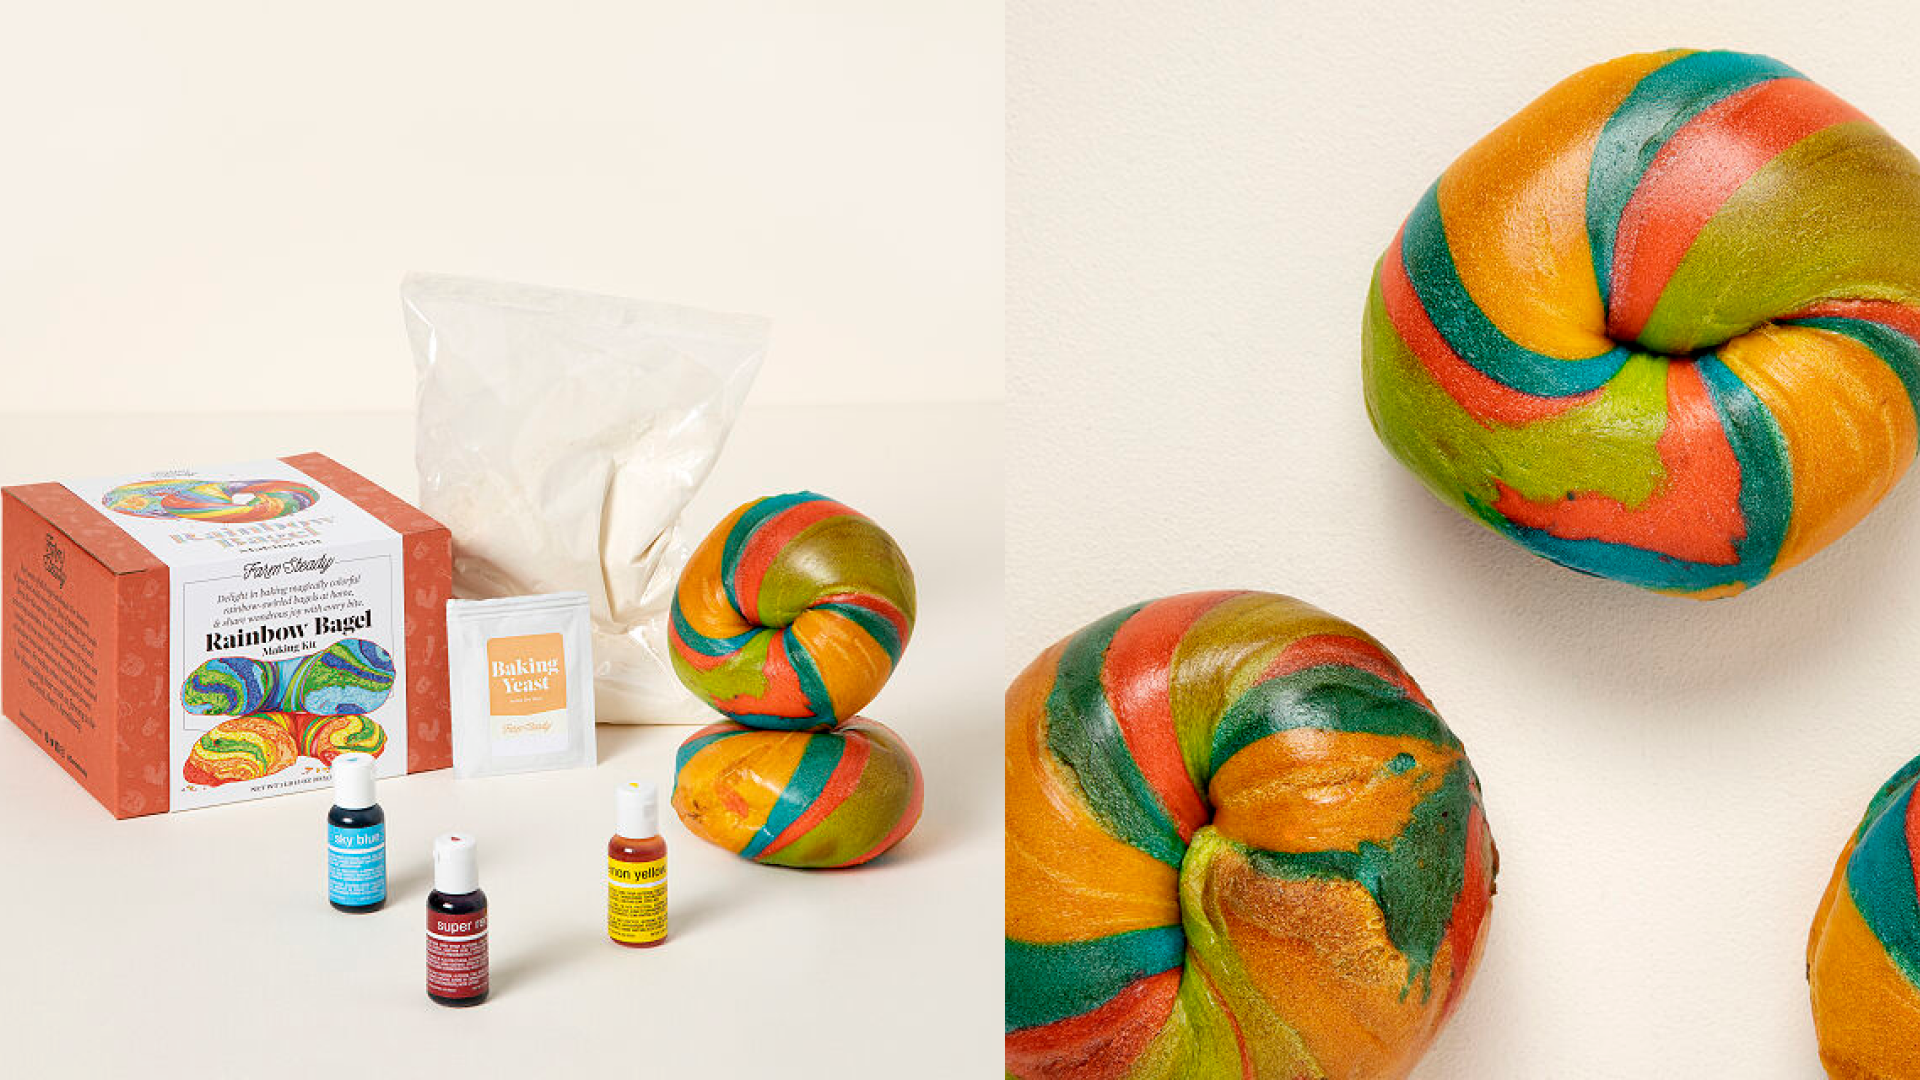 Make-your-own rainbow-bagel kit